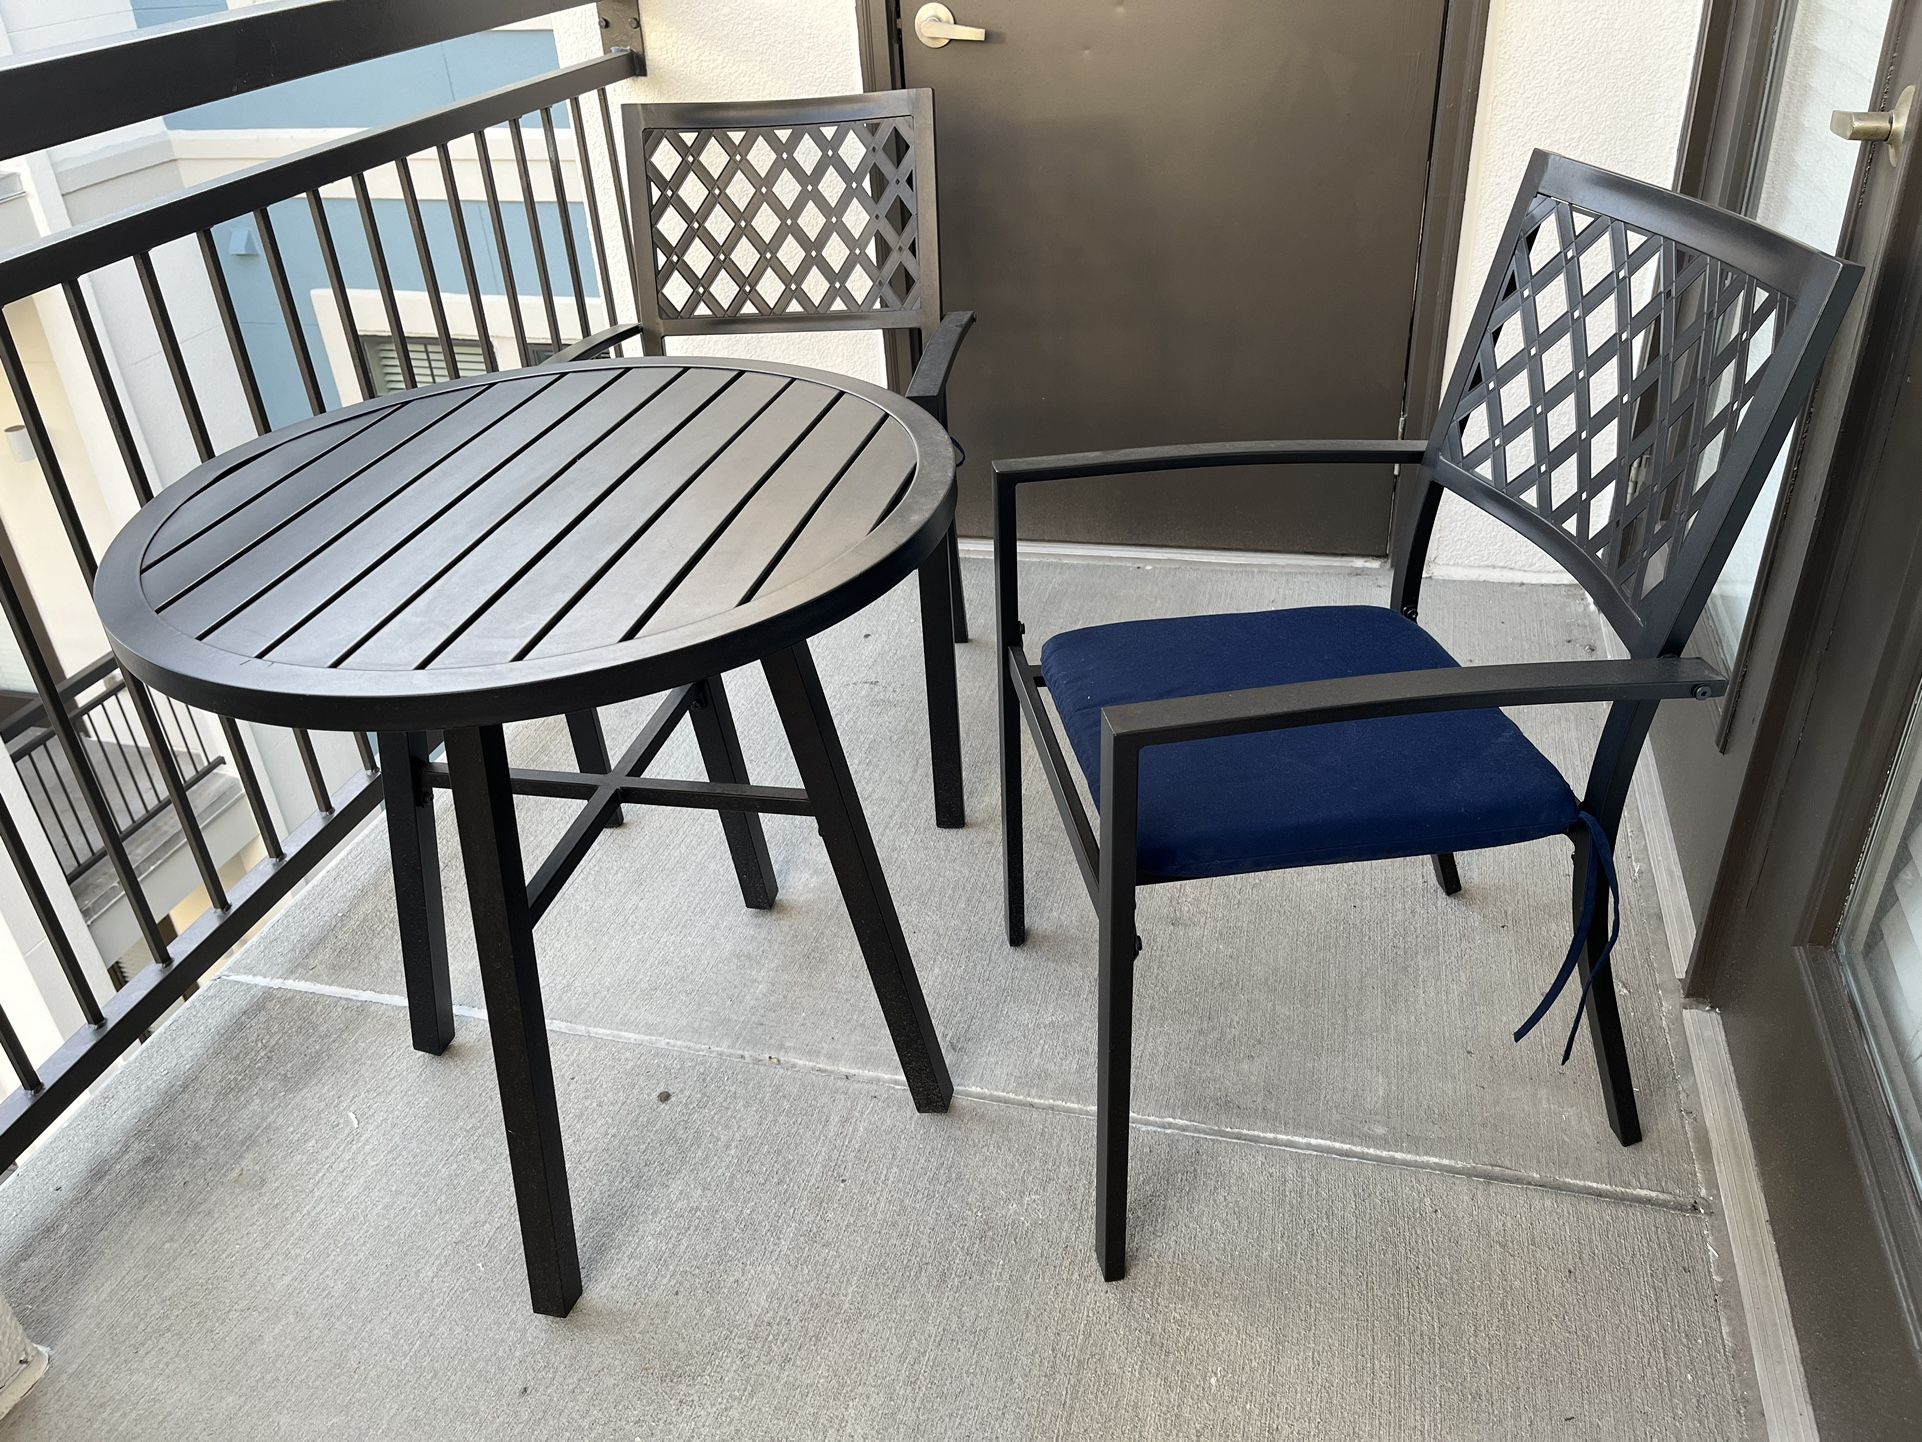 Patio Furniture Set - 2 chairs & table